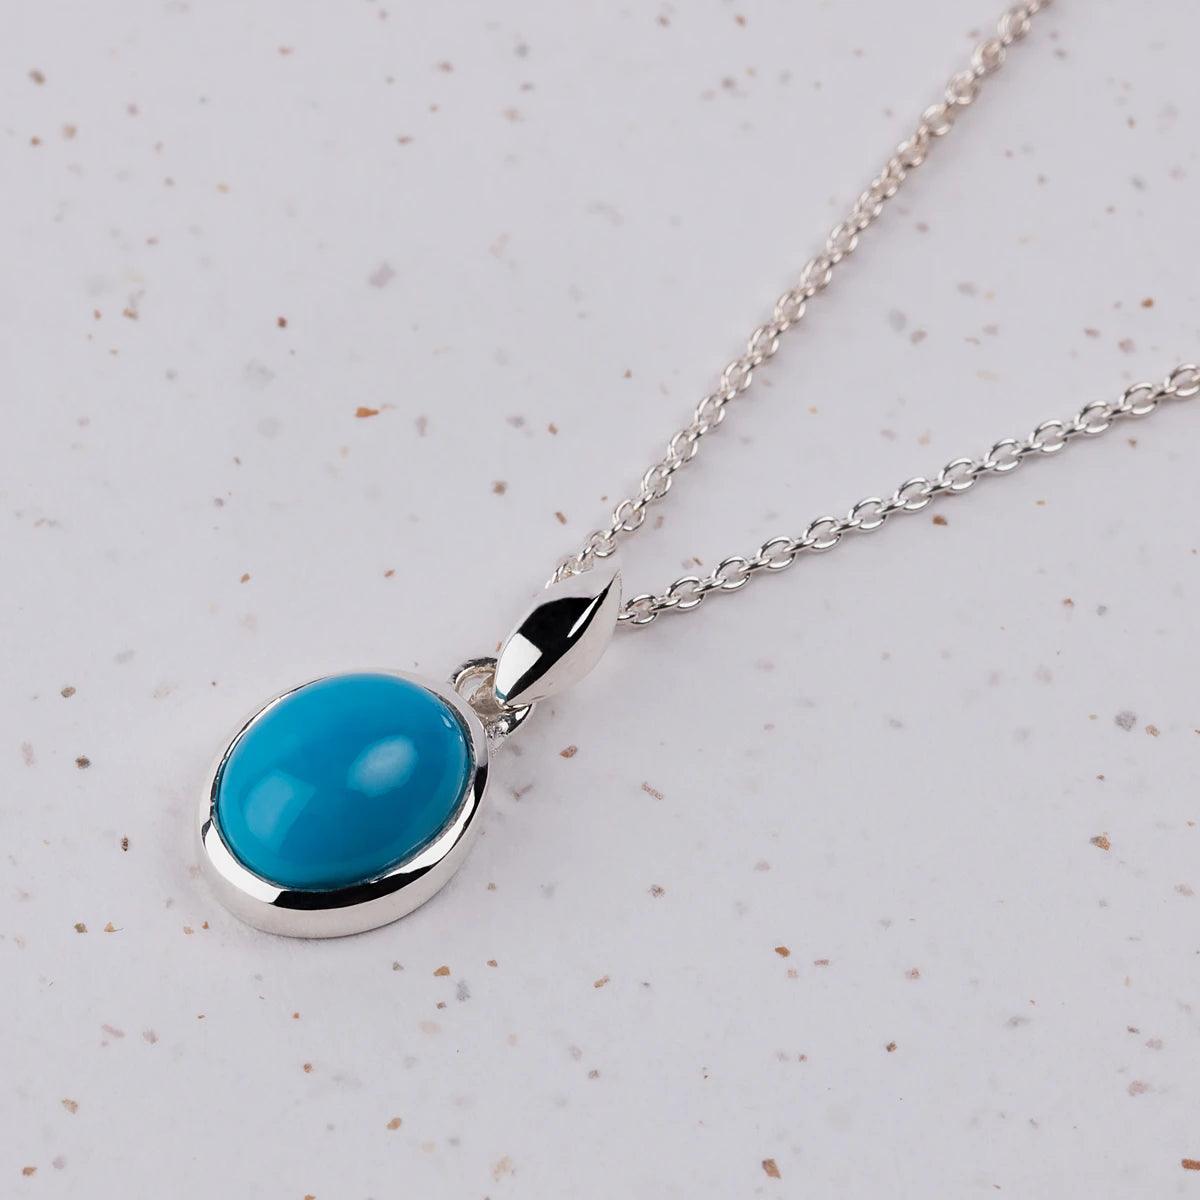 Jane Austen Beautiful Silver and Turquoise Pendant Necklace - JaneAusten.co.uk